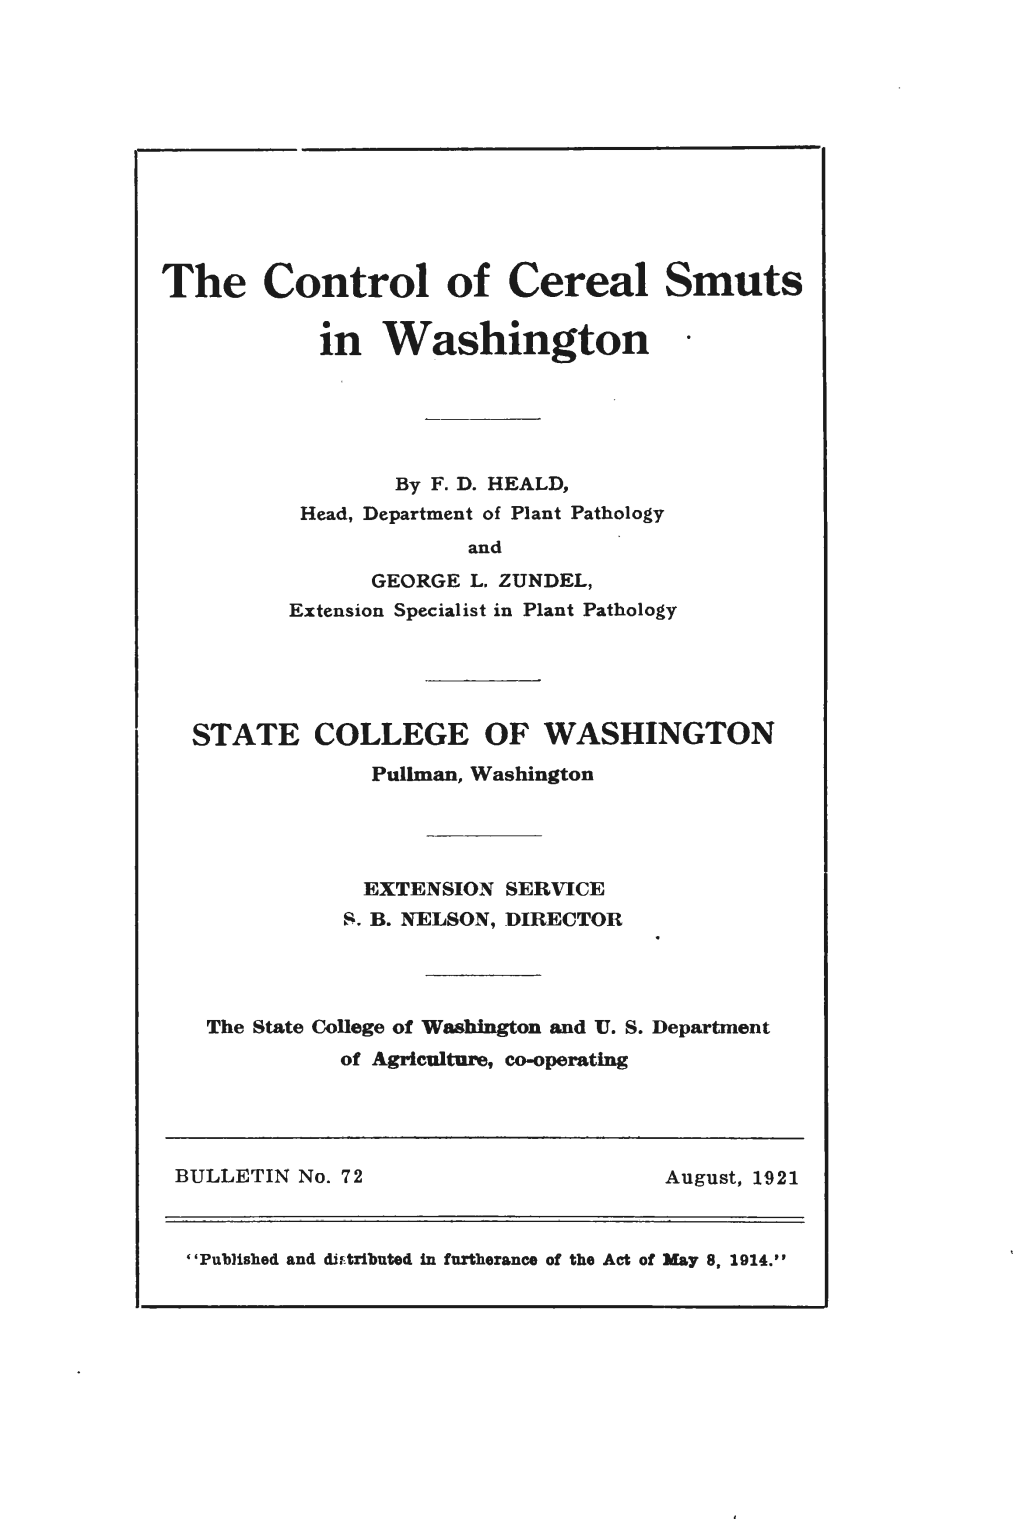 The Control of Cereal Smuts in Washington